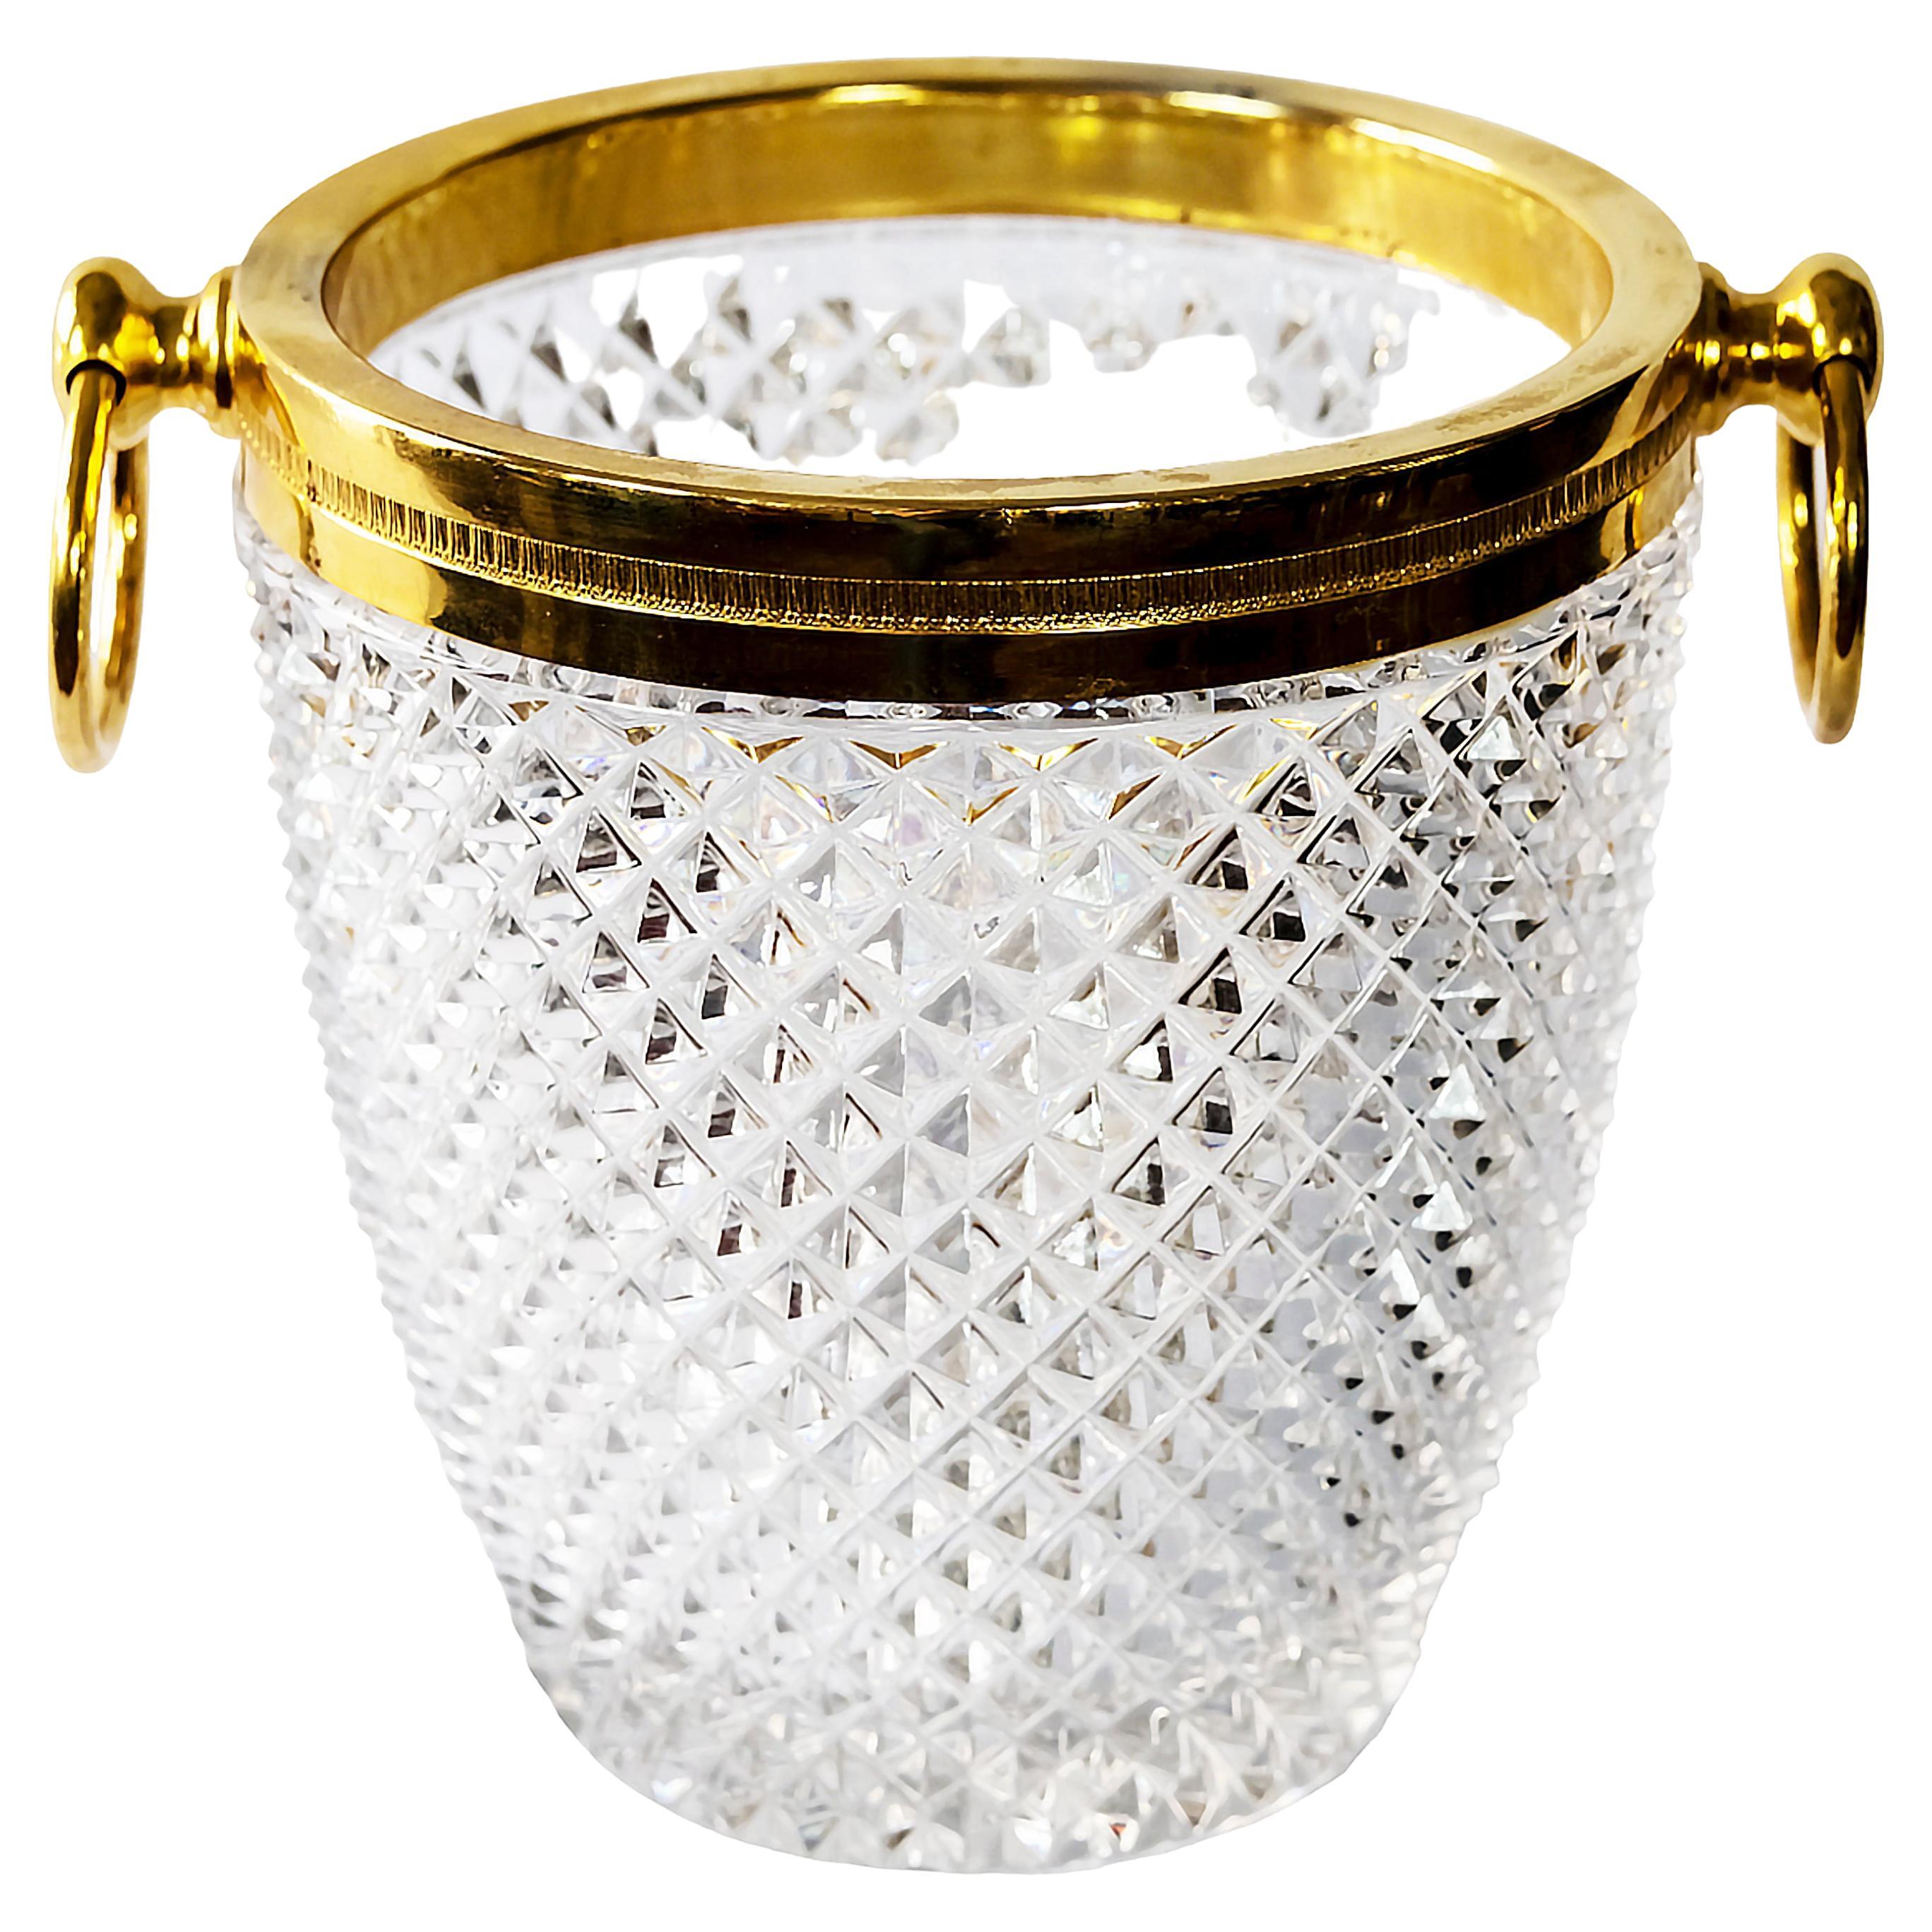 Vintage French hand made cut crystal champagne bucket decorated with gilt metal and handles.
Very heavy and solid.